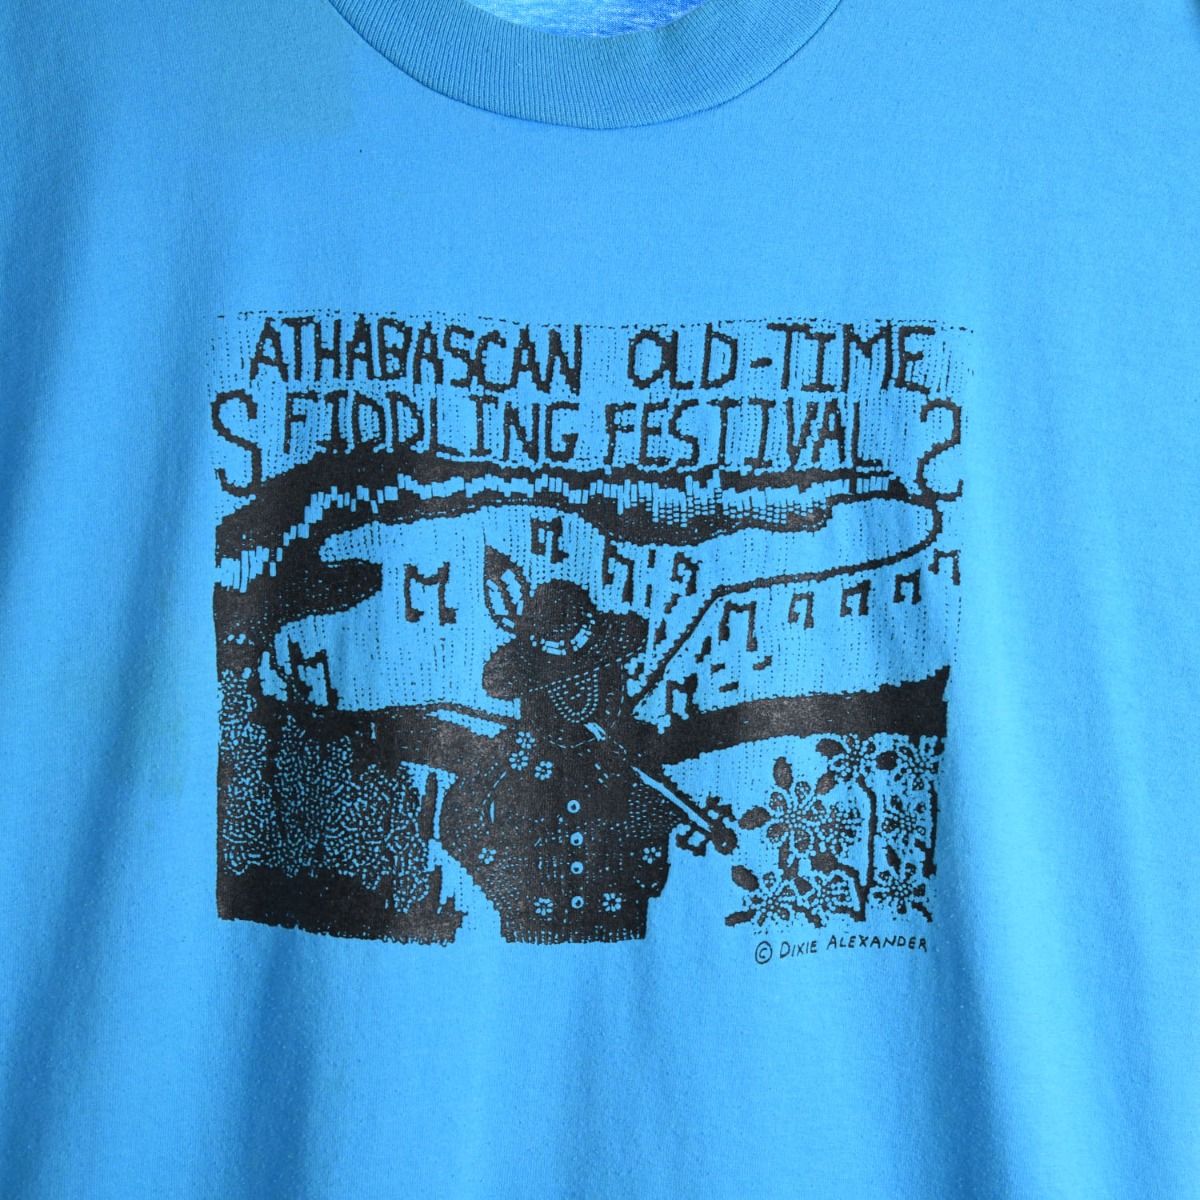 'Athabascan Old-Time Fiddling Festival' 1990s T-Shirt